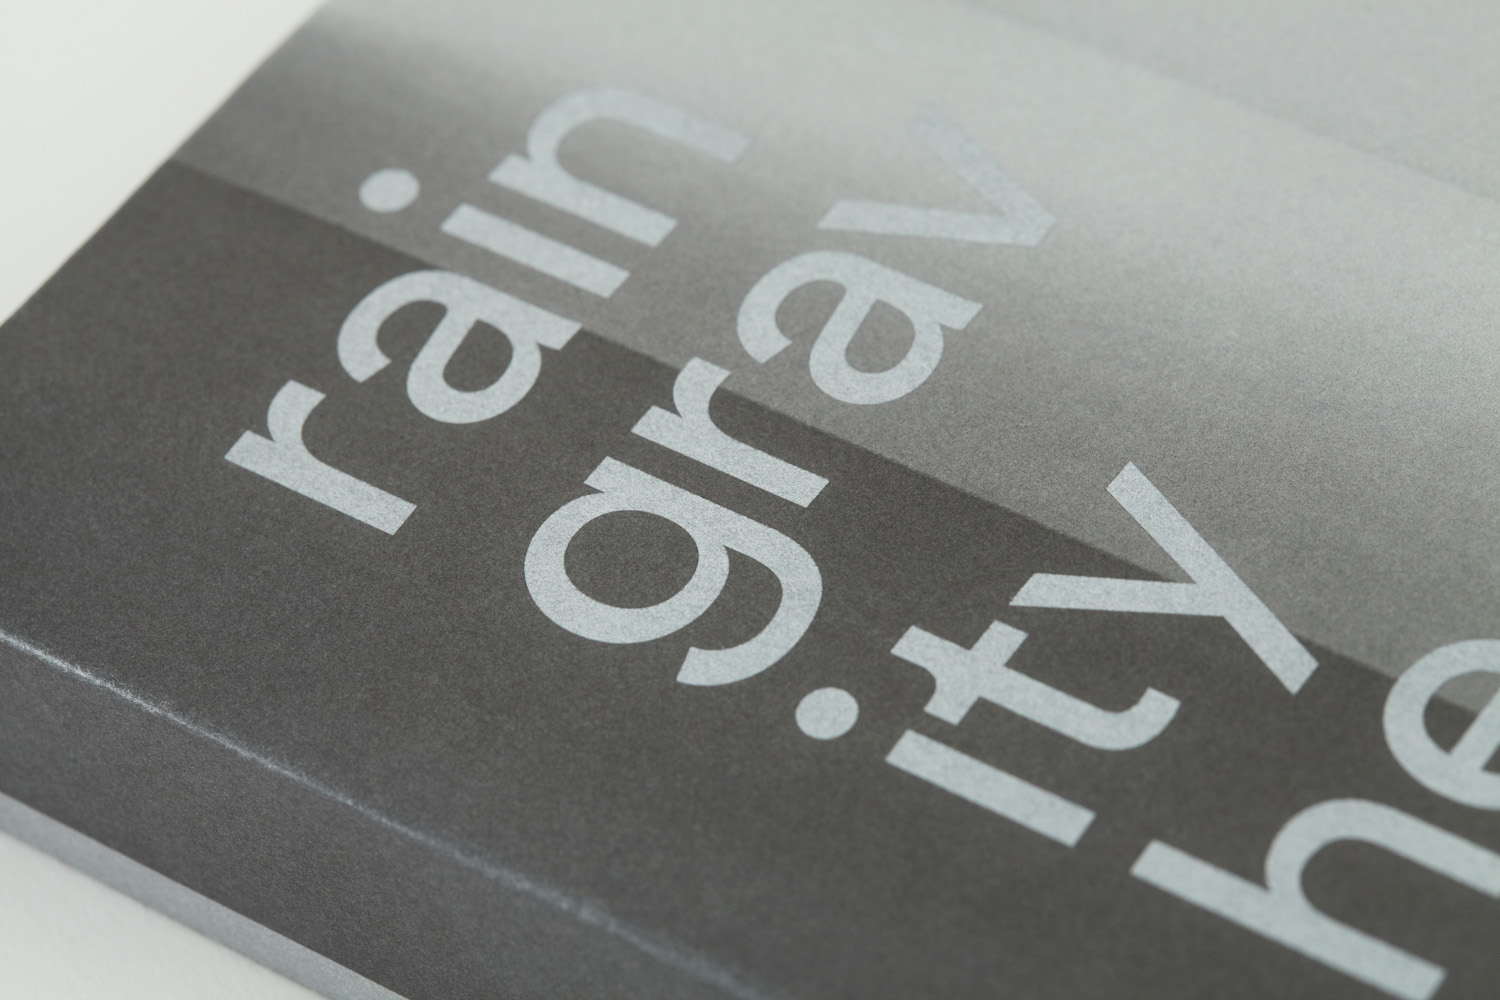 Rain, Gravity, Heat, Cold, a book designed by Blok celebrating the first ten years of Canadian architecture studio Superkül